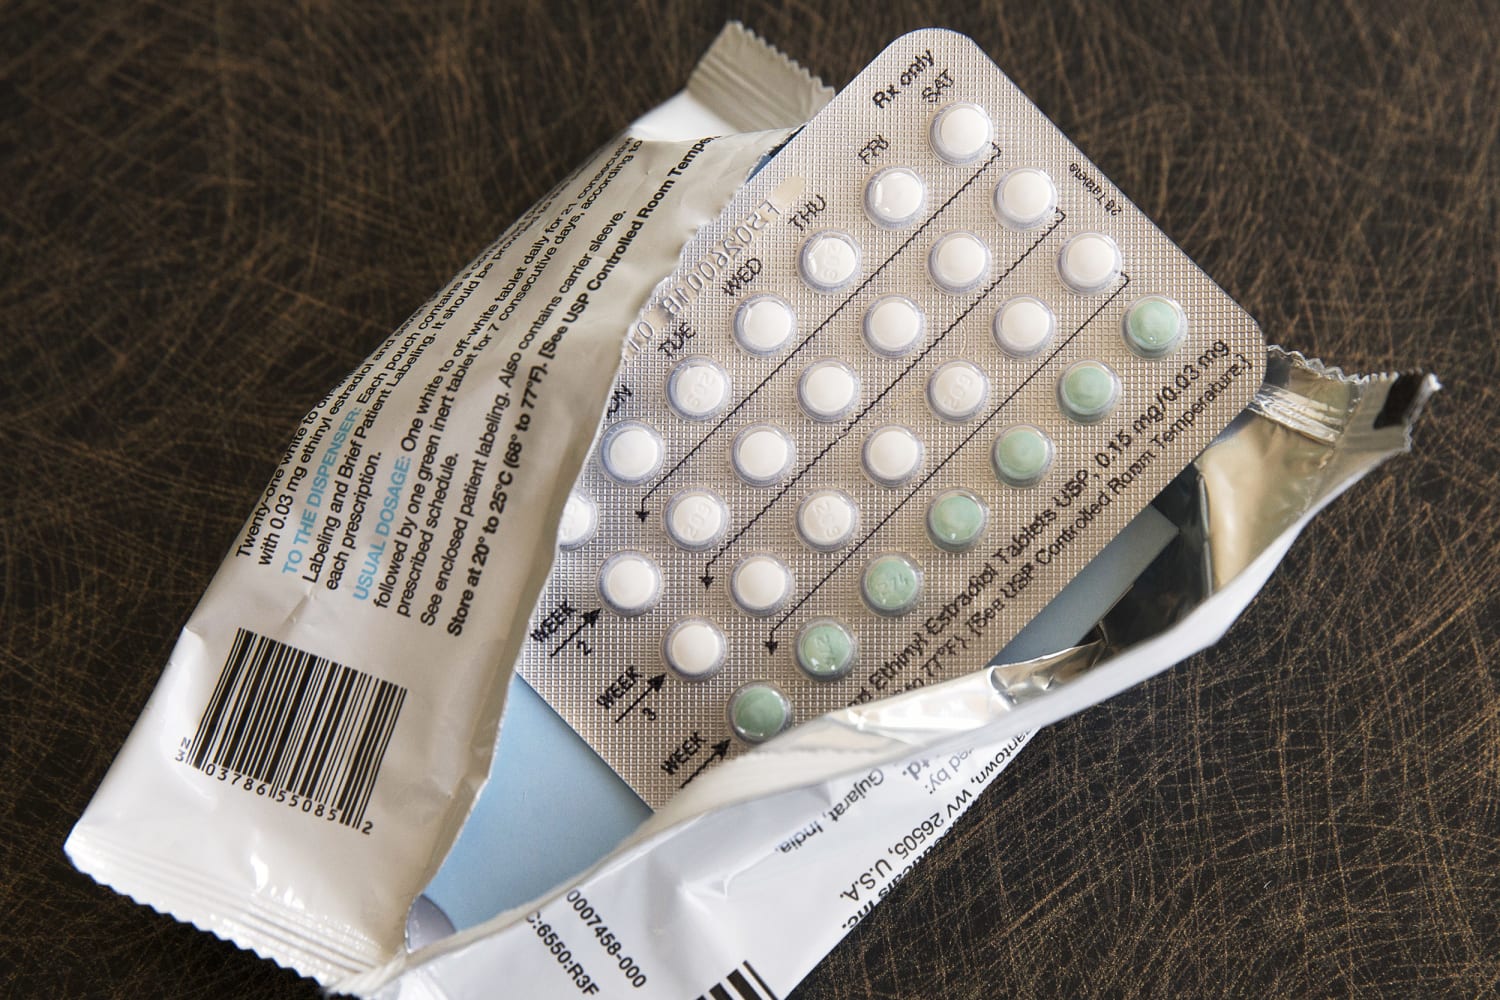 FDA advisers to meet on over-the-counter birth control pills